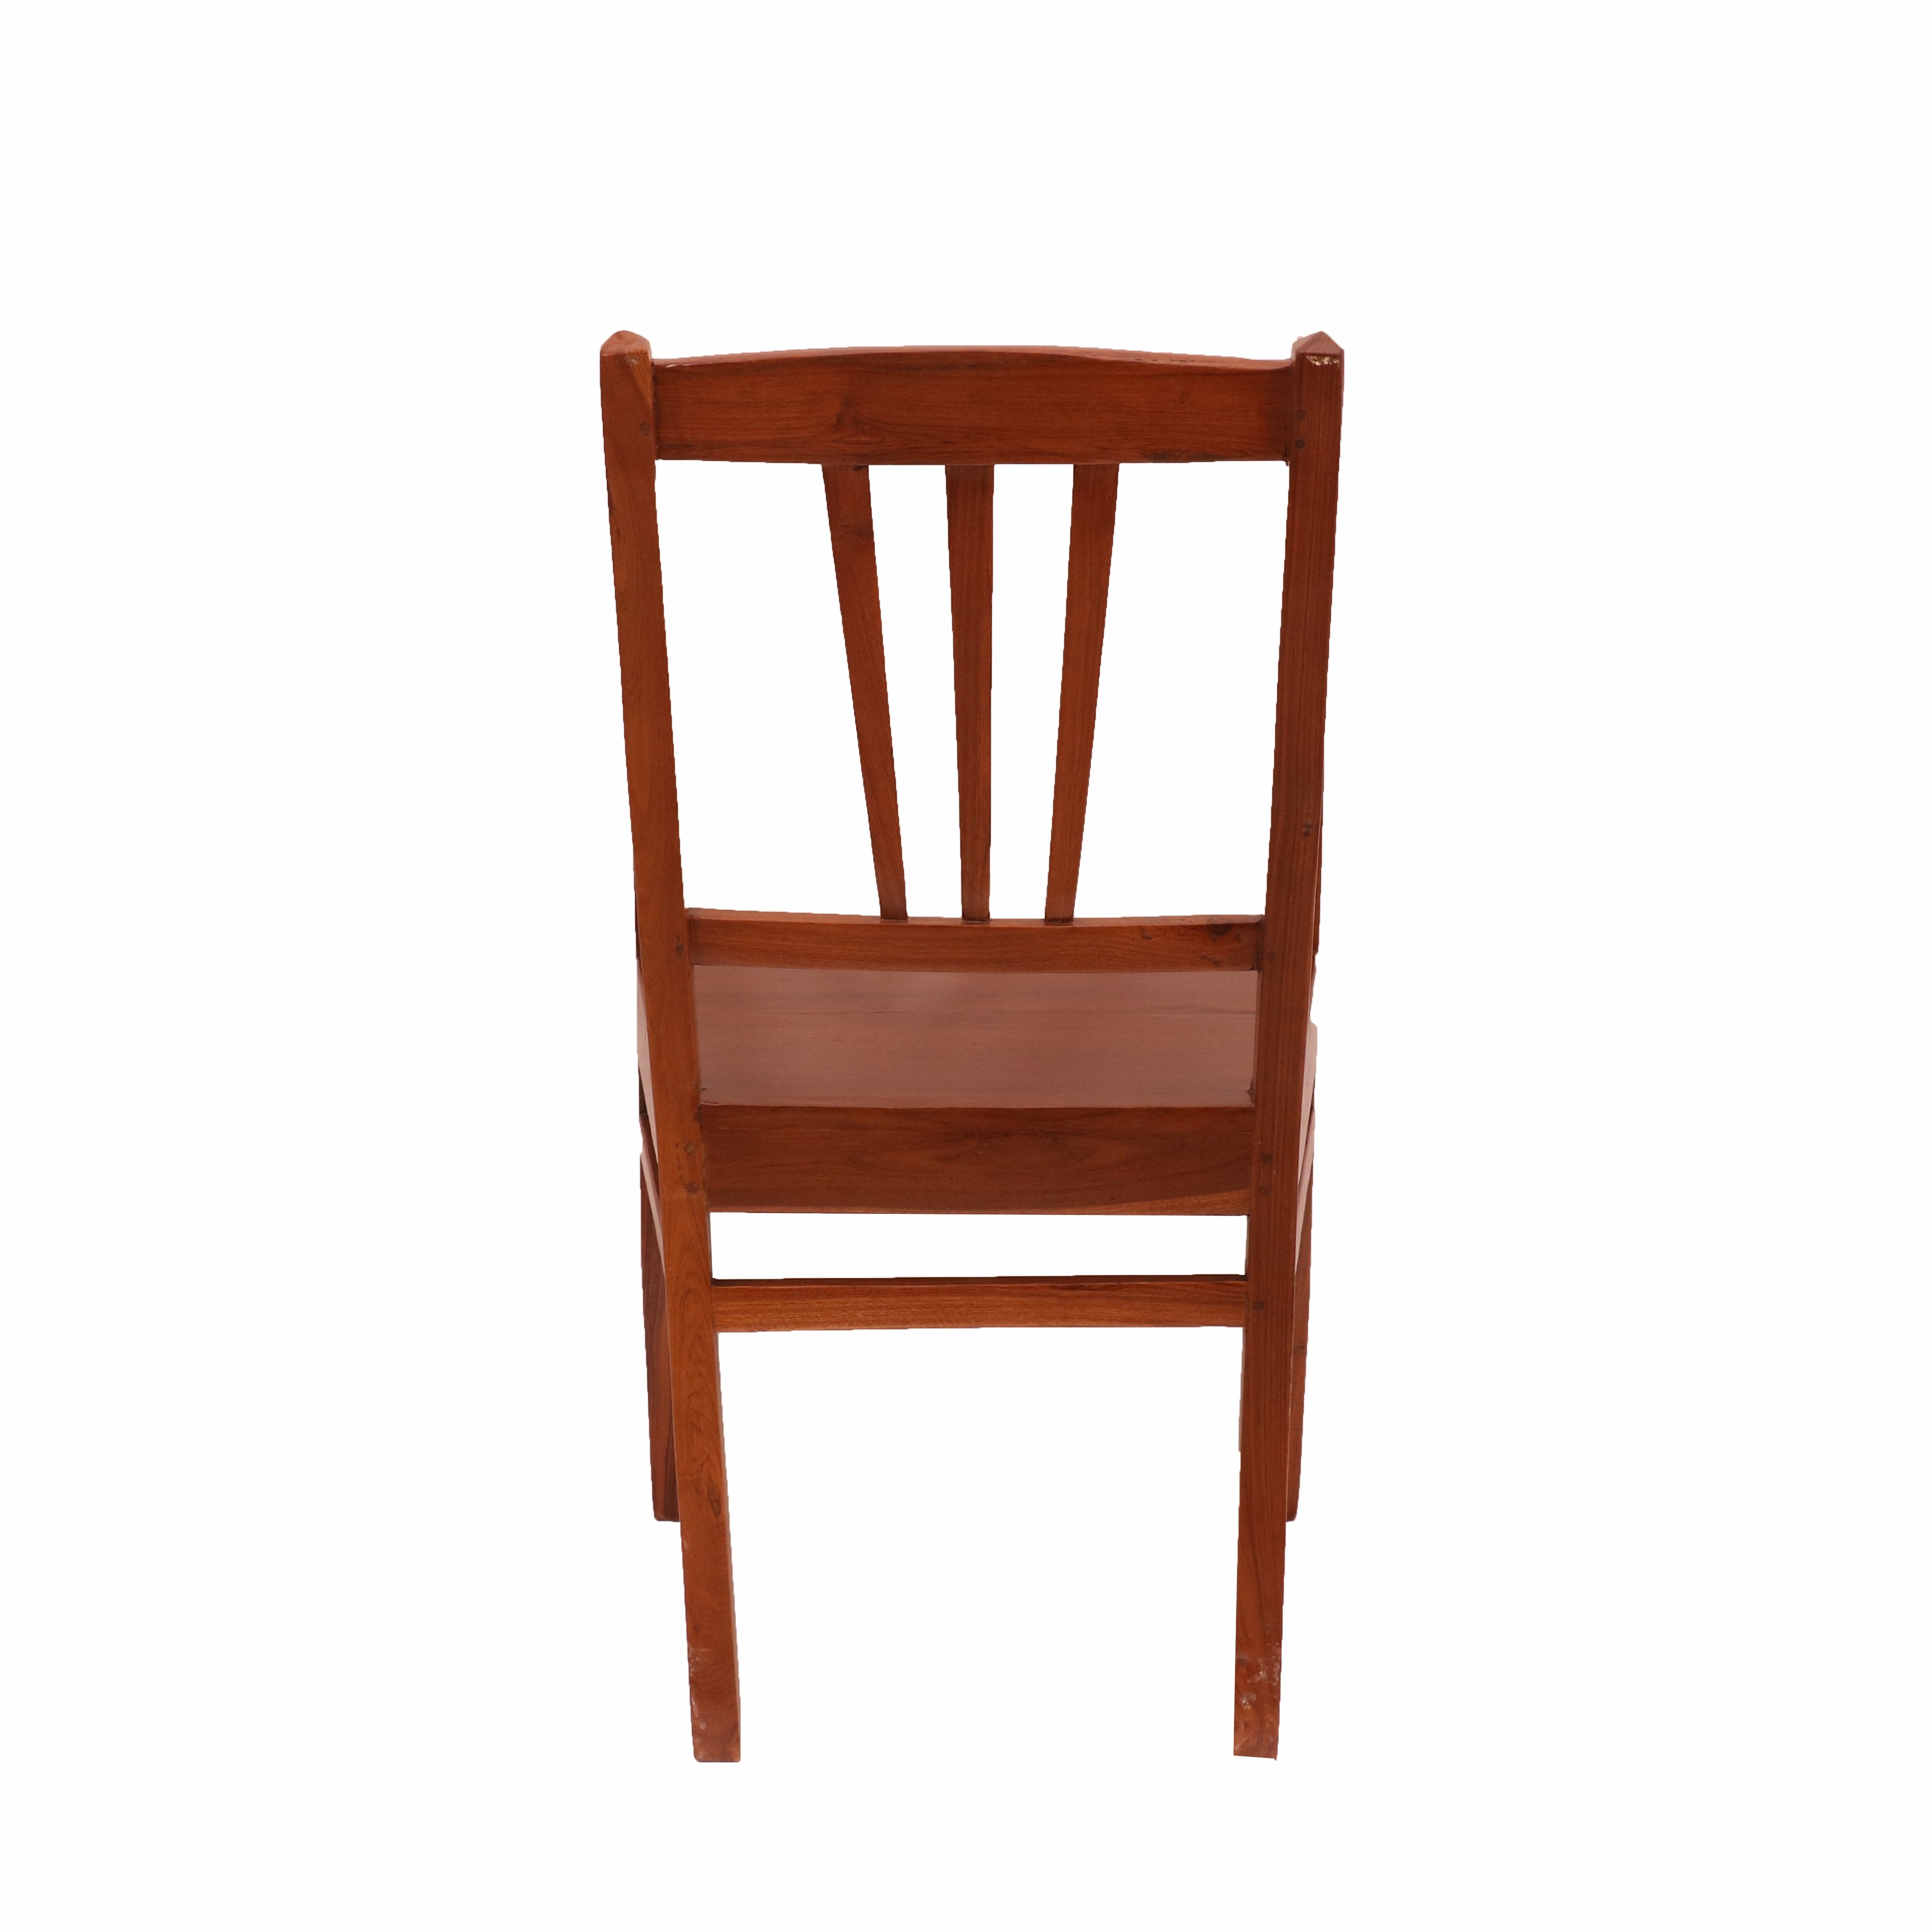 Simple Classic Wooden Chair Arm Chair